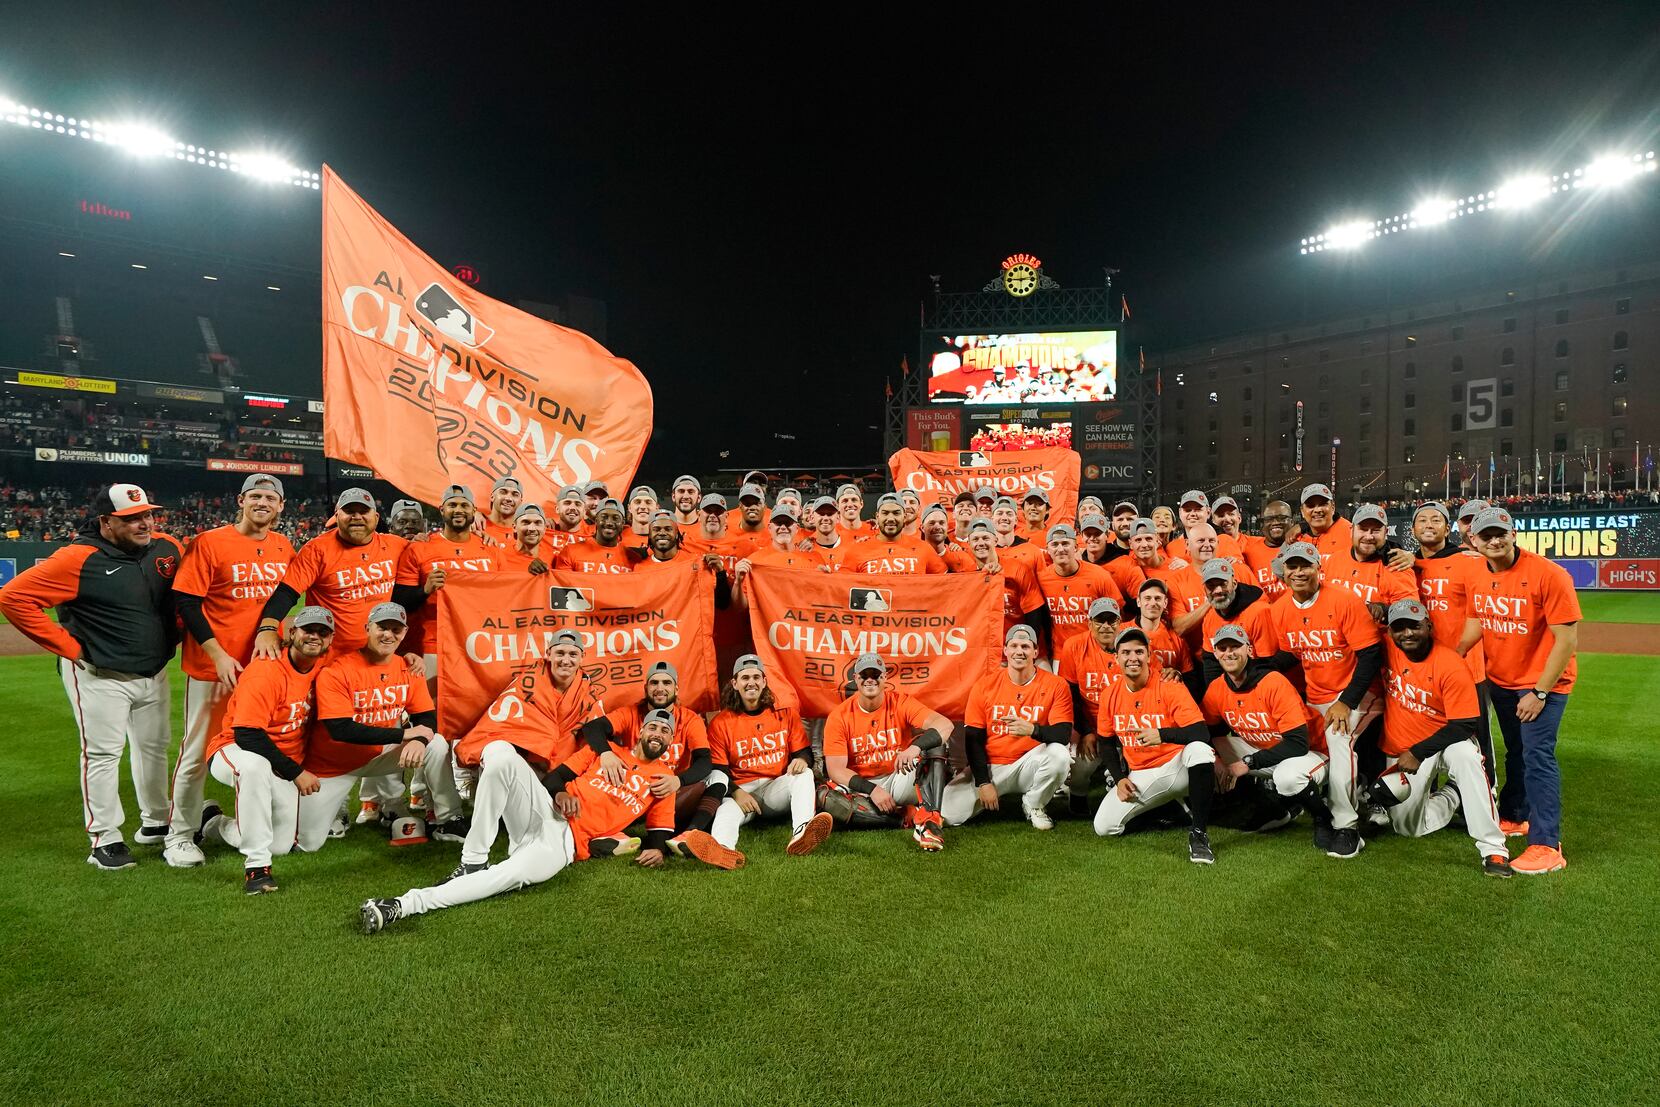 30 years ago: Orioles played, won first game at Oriole Park at